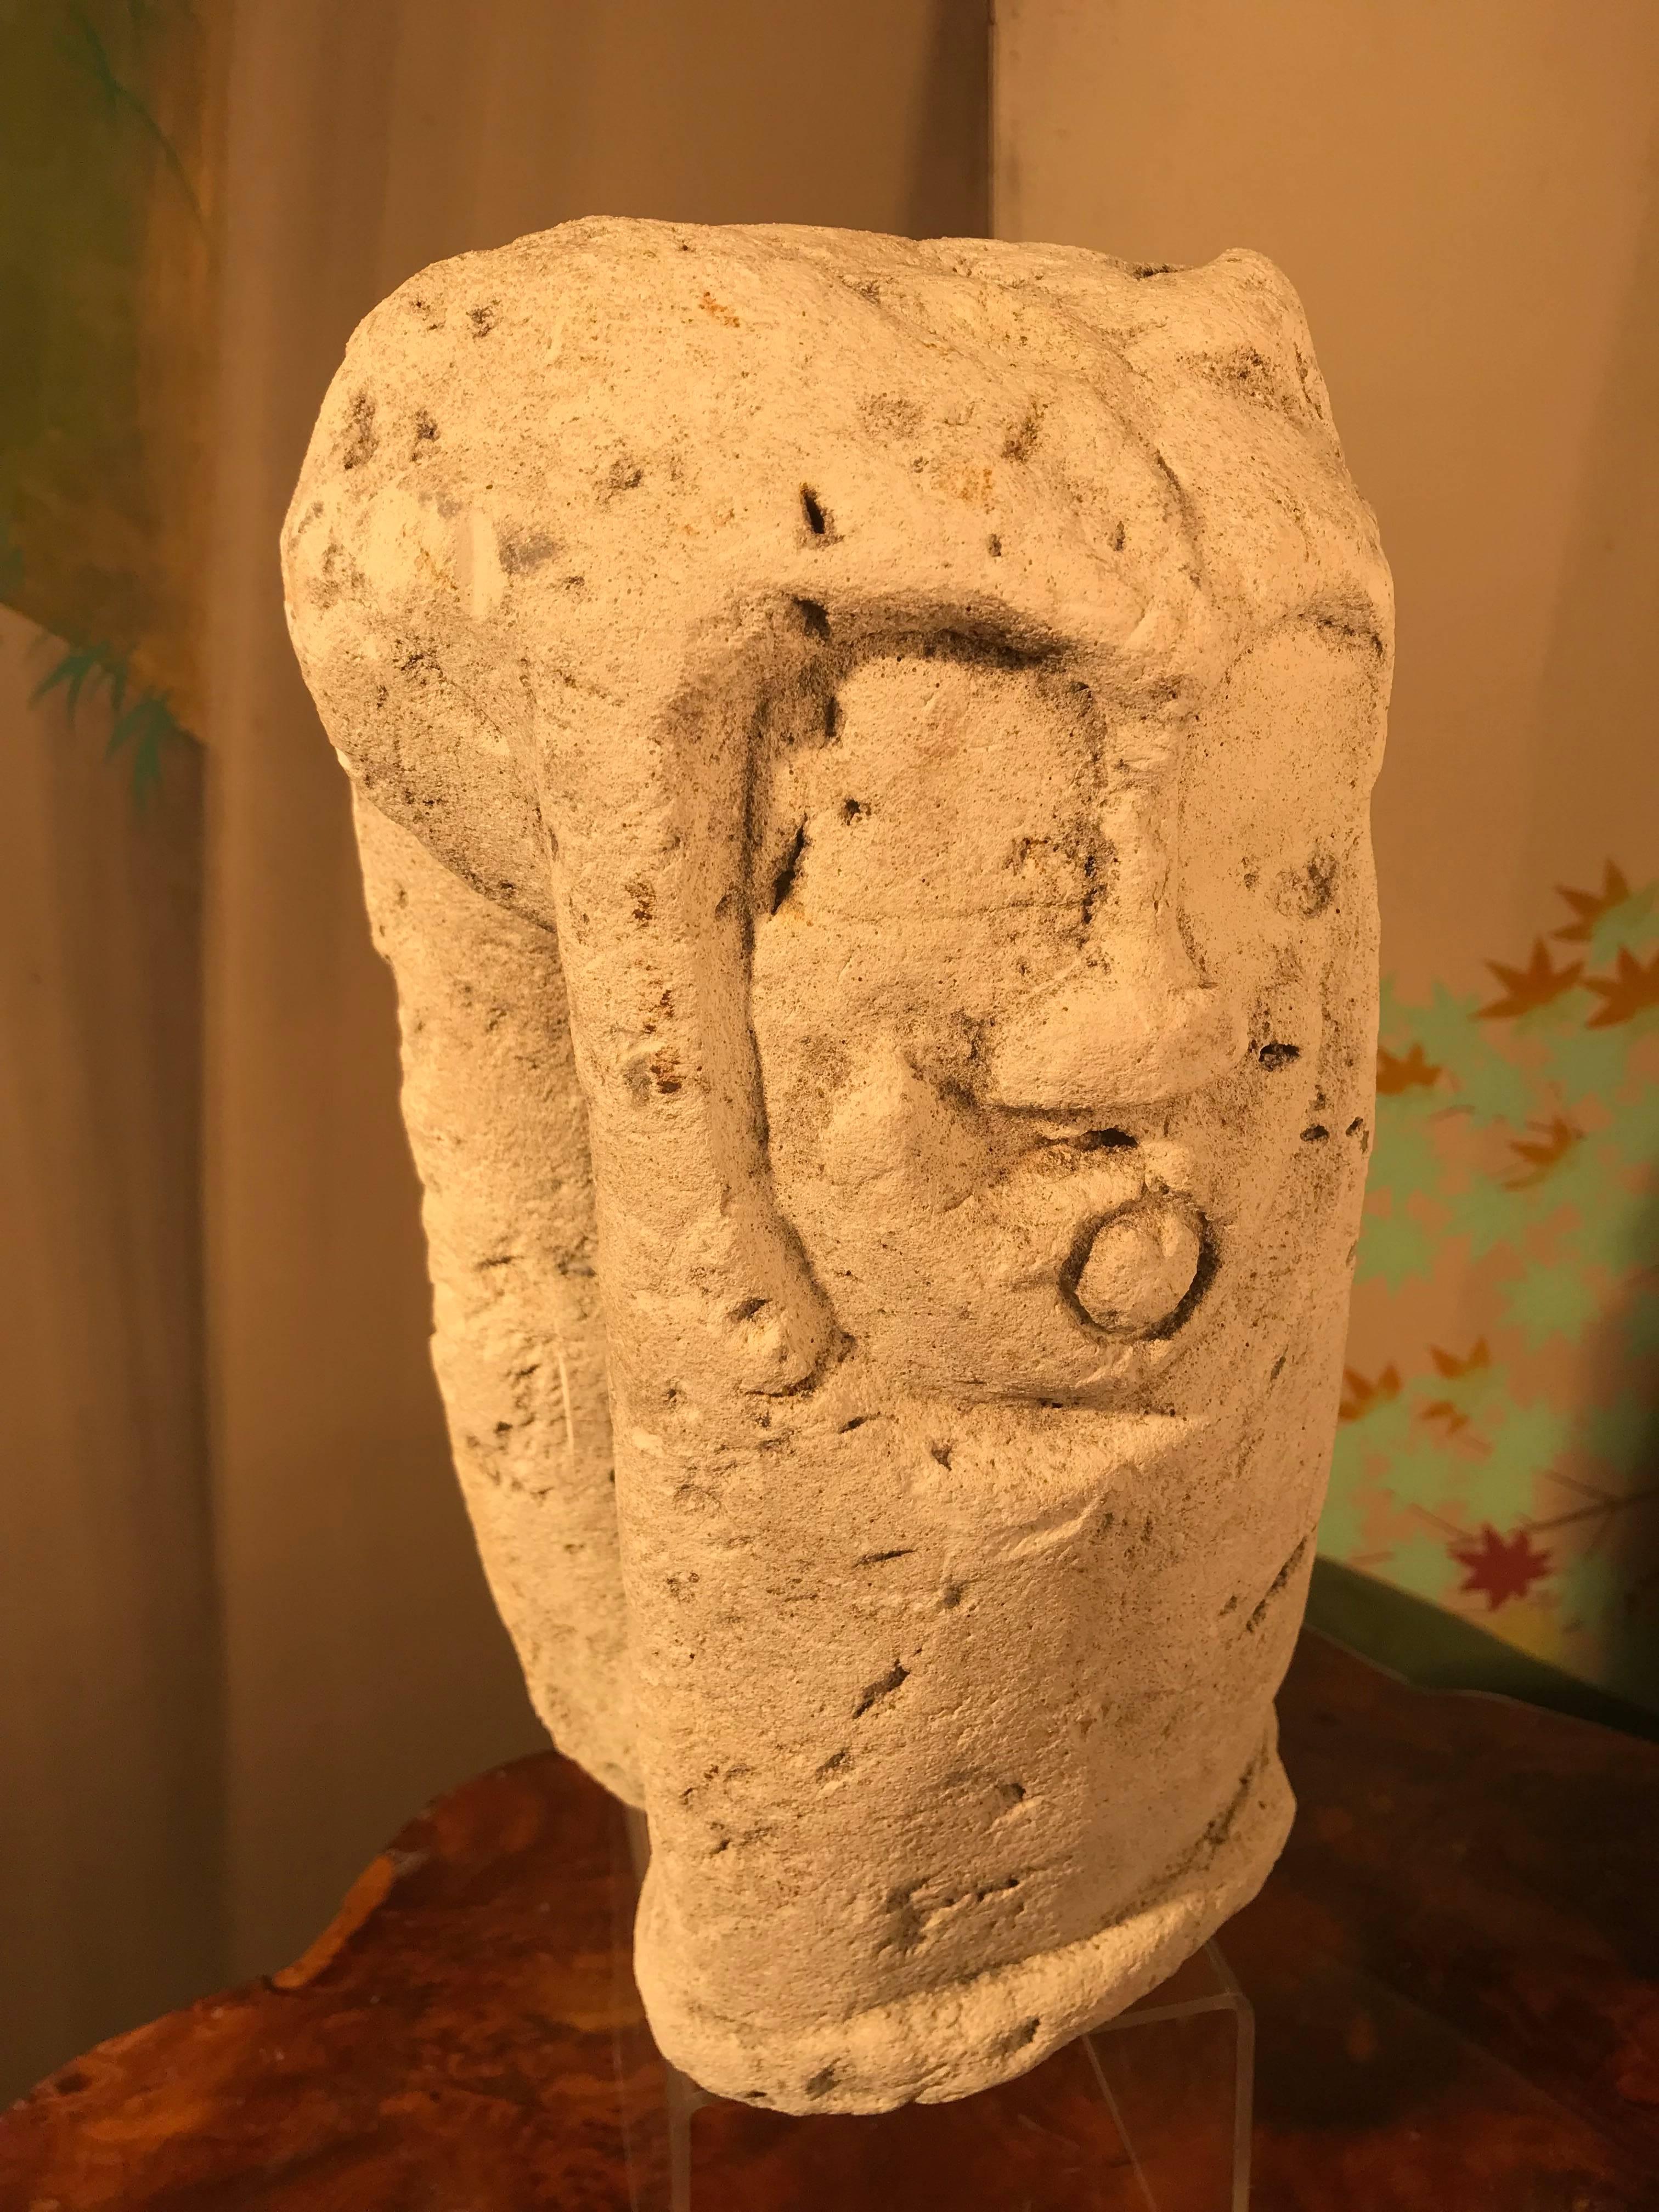 New Ireland Archaic “Double” Figure “Kulap” marker sculpture, chalk stone, late 19th-early 20th century.

Hand-carved with great old patina, an authentic old Oceania work of art rarely offered to the collecting marketplace 

Dimensions: 12 inches